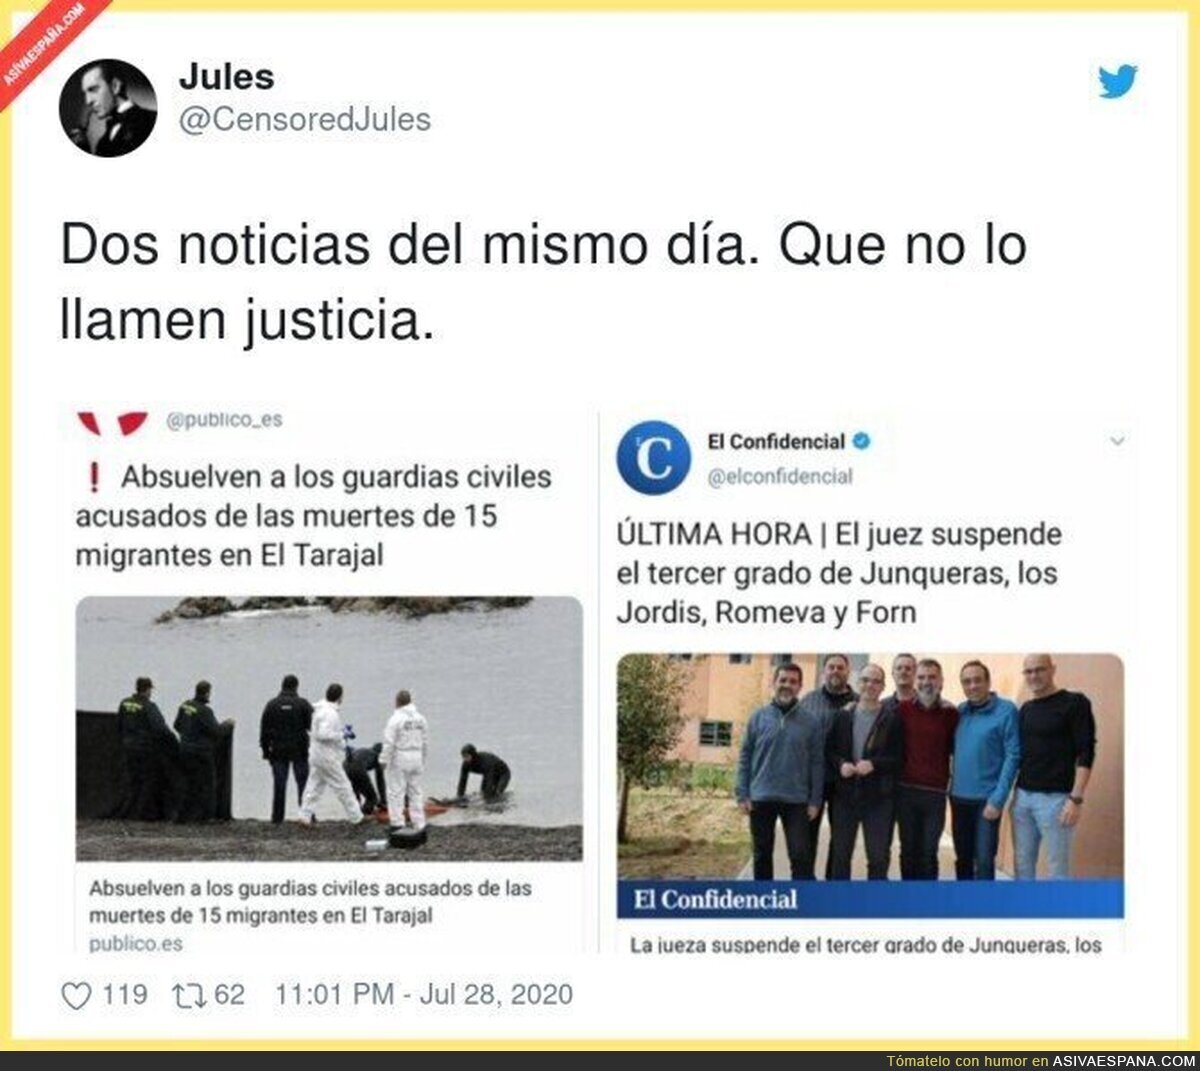 Justicia made in Spain